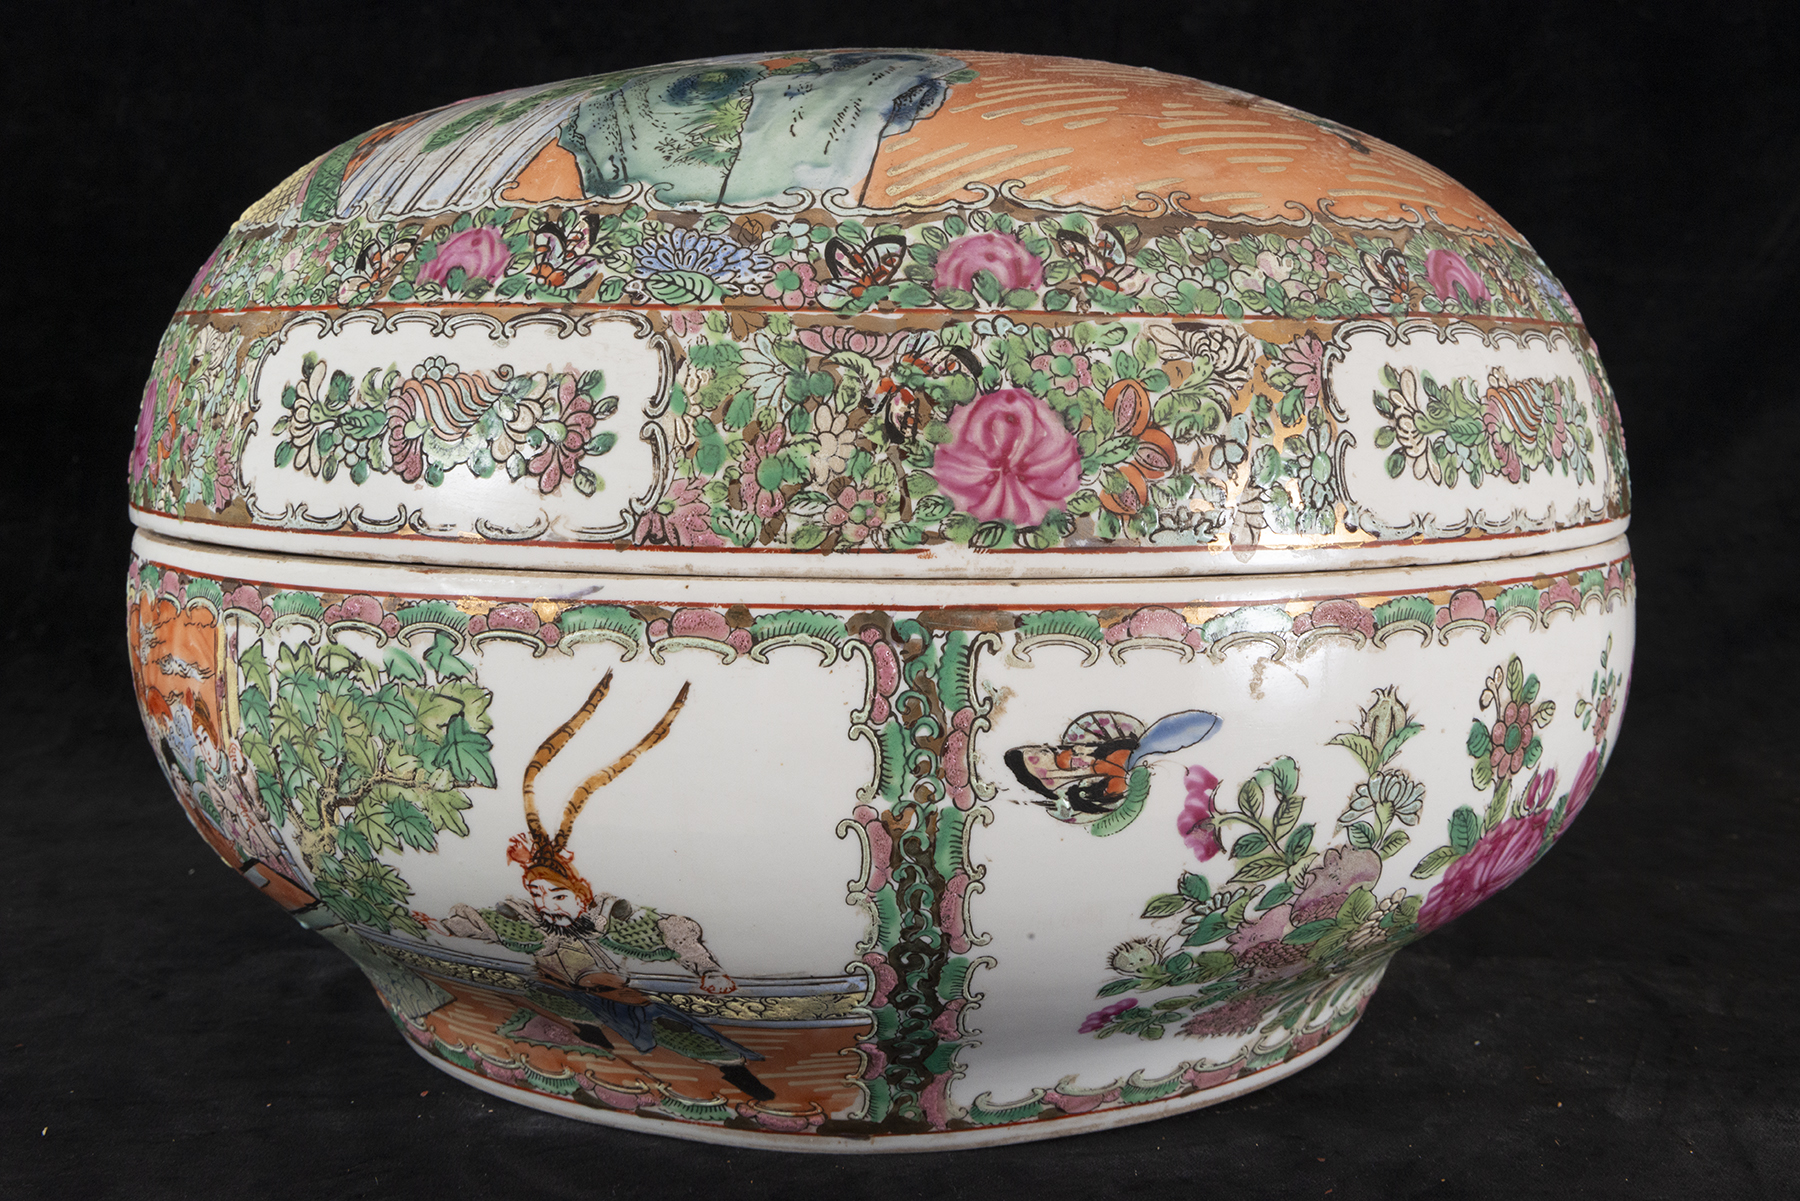 Large Canton Chinese porcelain box in "famille rose" enamel, late 19th century - Image 4 of 5